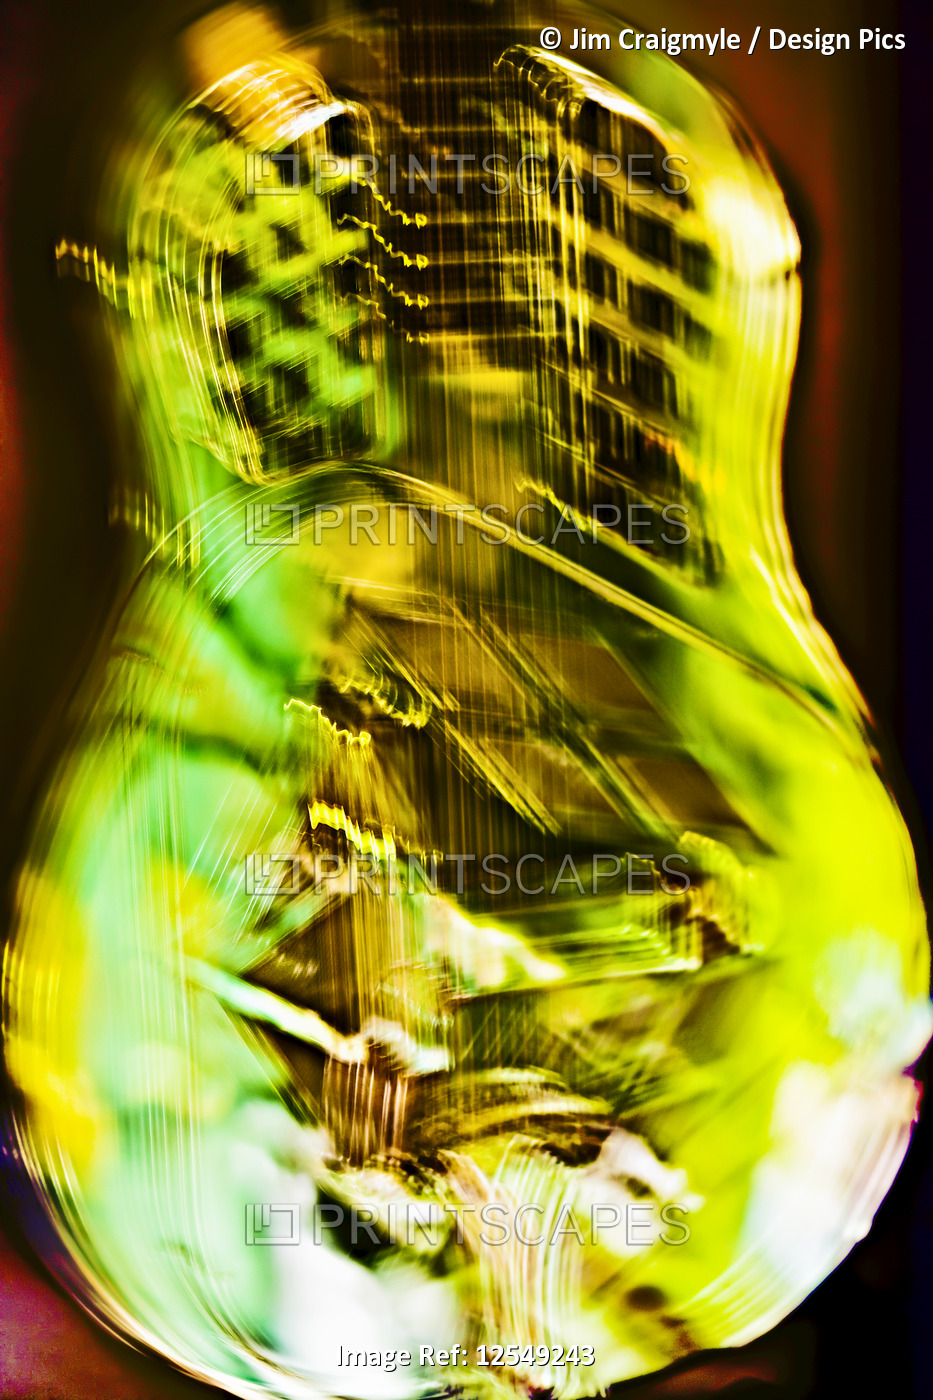 Blur of a tricone guitar in green and yellow